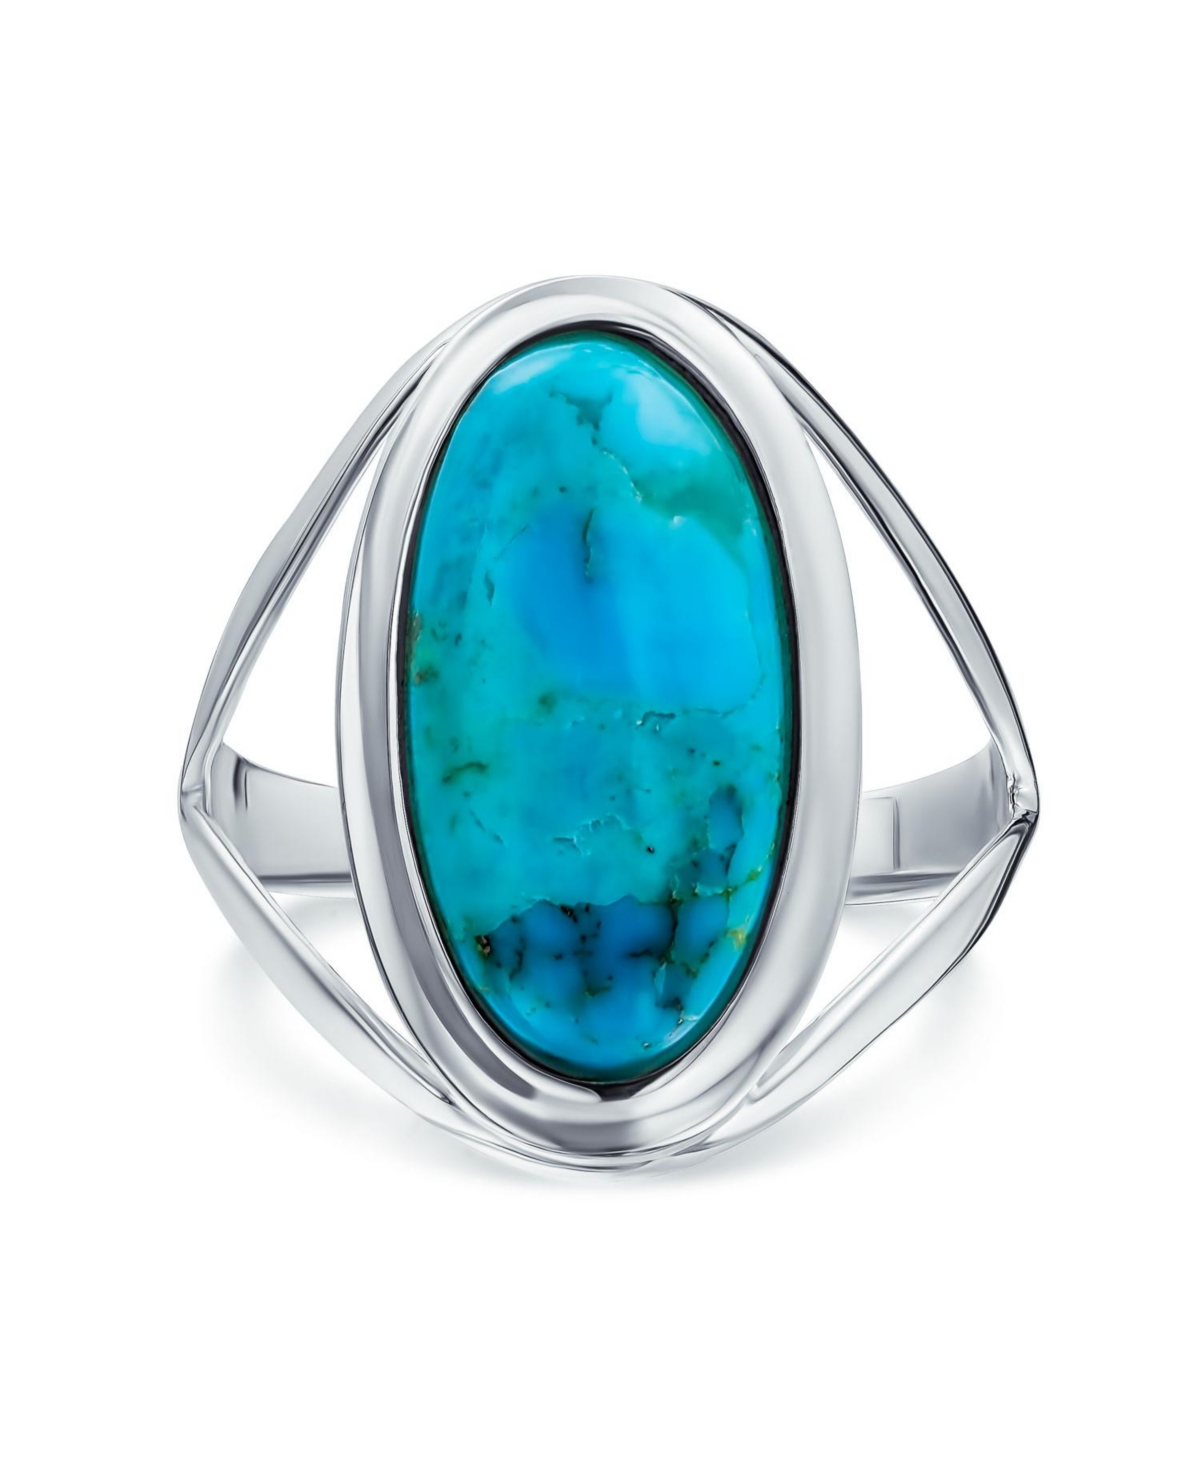 Simple Large Dome Oval Cabochon Gemstone Bezel Set Blue Turquoise Western Statement Ring For Women Split Band .925 Sterling Silver - Blu